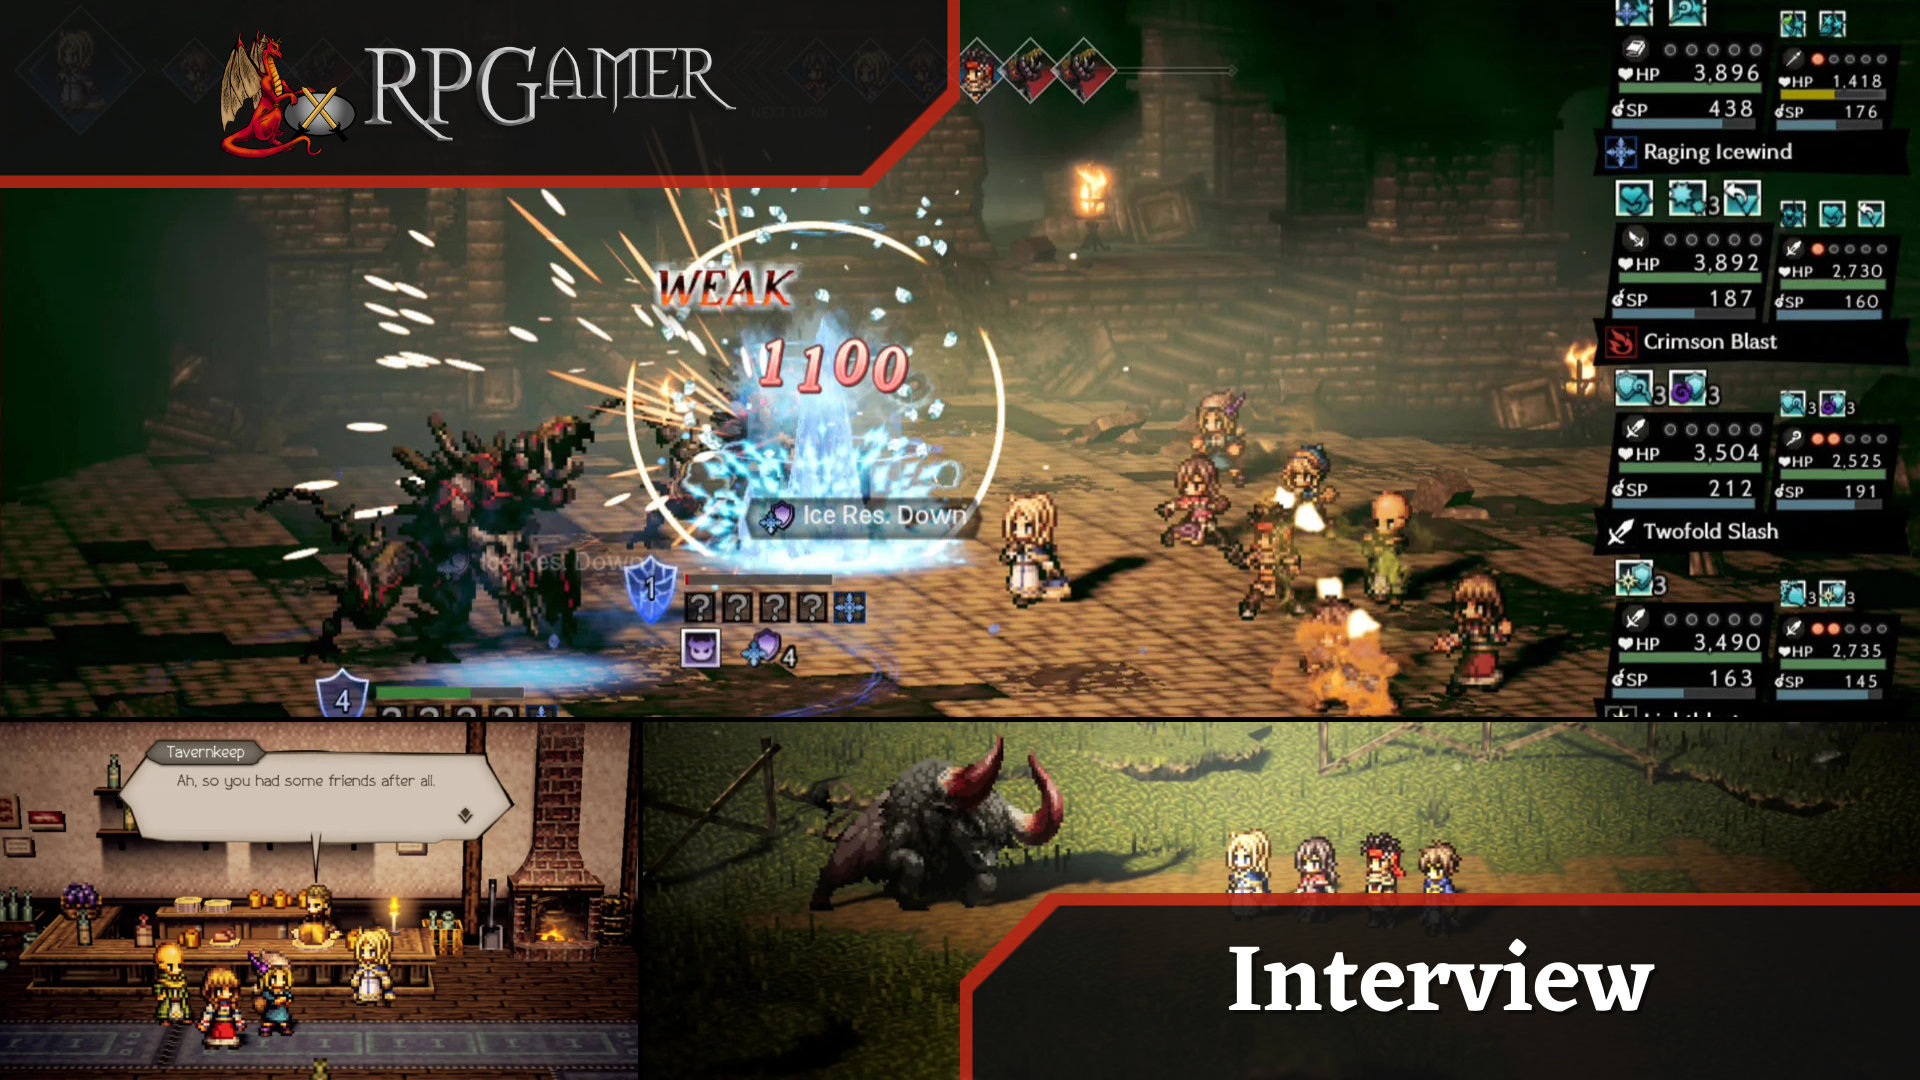 Octopath Traveler: Champions Of The Continent adds new playable